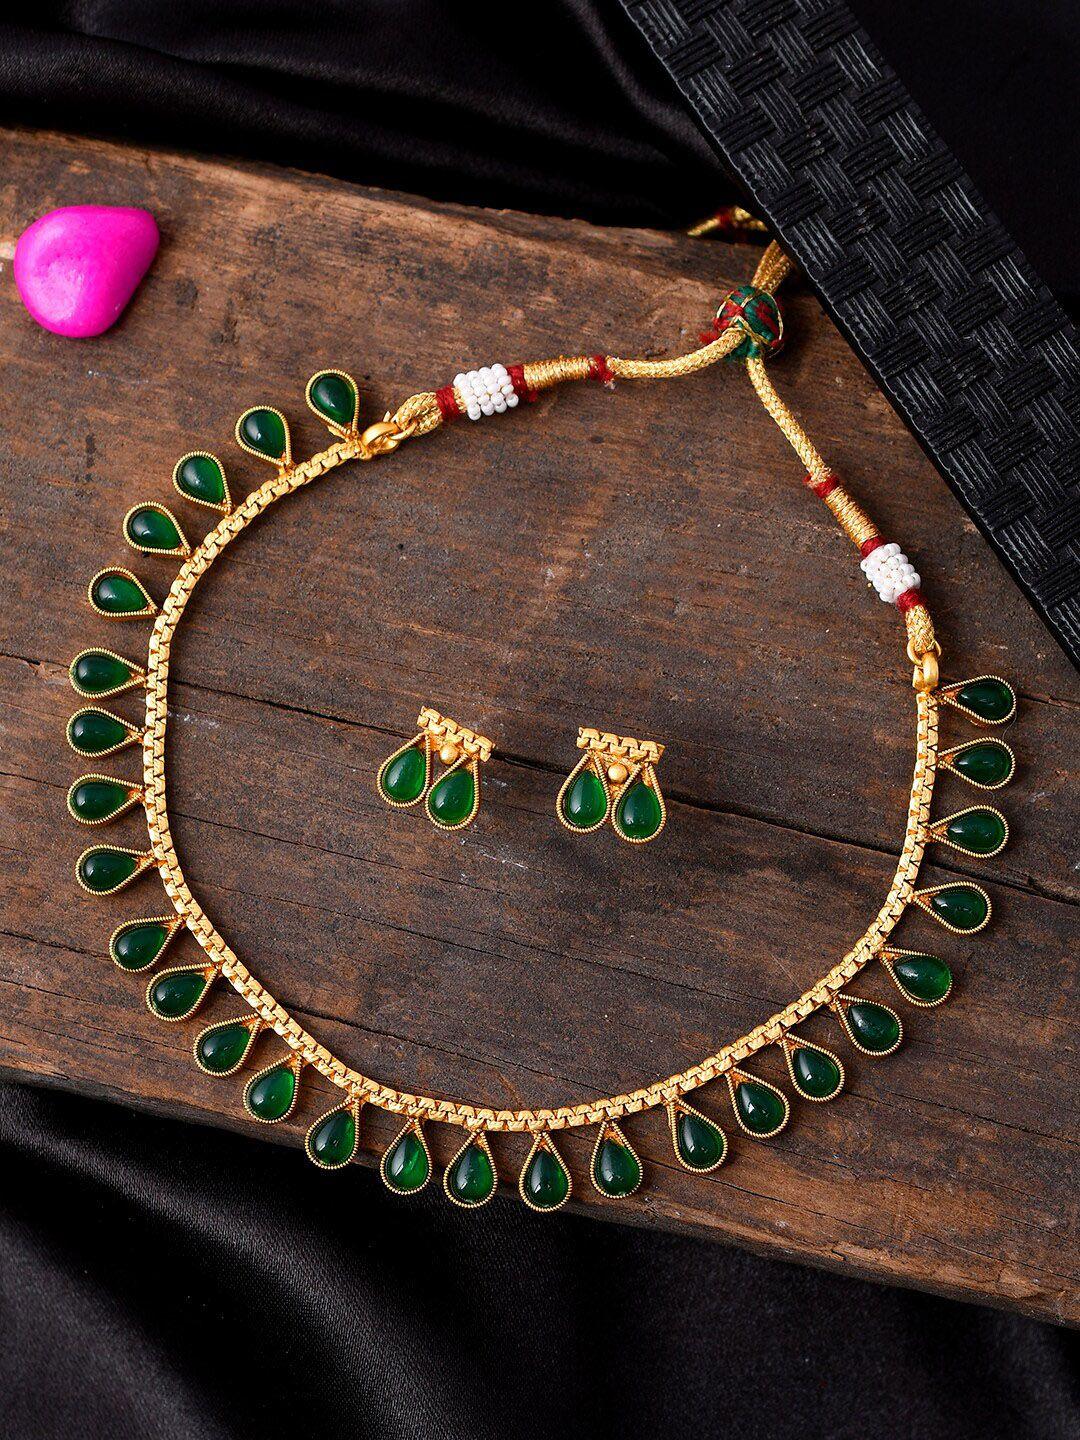 aquastreet jewels gold-plated emerald studded  necklace & earrings set